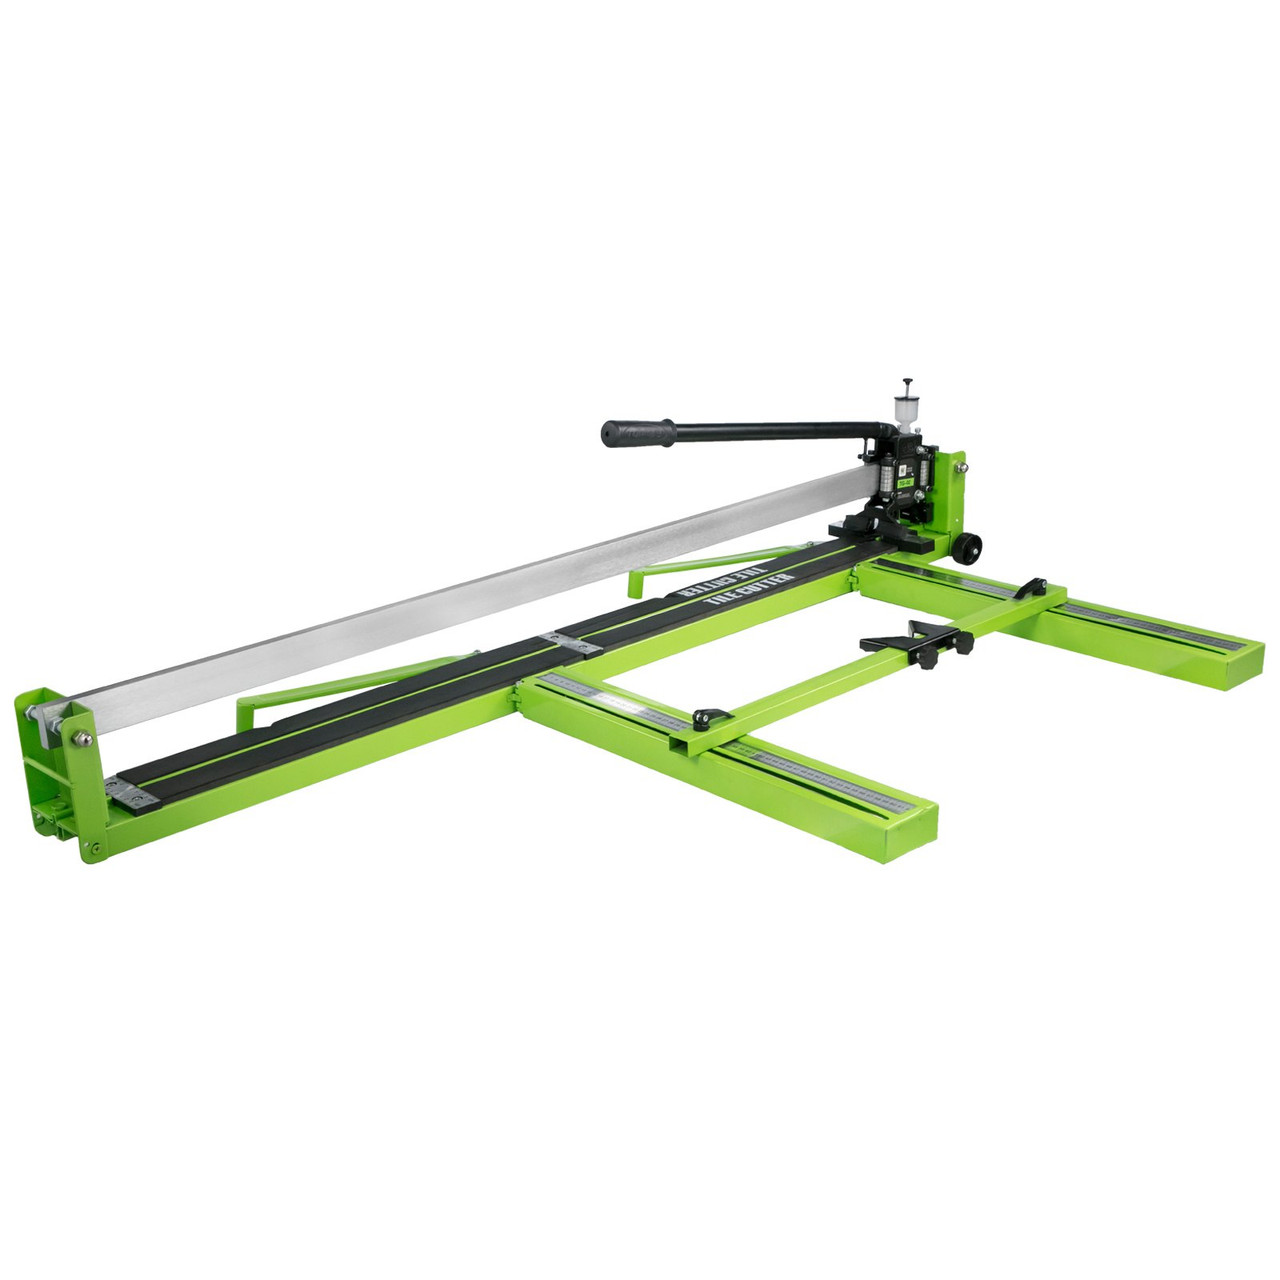 Tile Cutter 47 Inch, Manual Tile Cutter All-Steel Frame,Tile Cutting Machine w/Laser Guide and Bonus Spare Cutter,Tile Cutter Hand Tool for Precision Cutting Porcelain Ceramic Floor Tiles